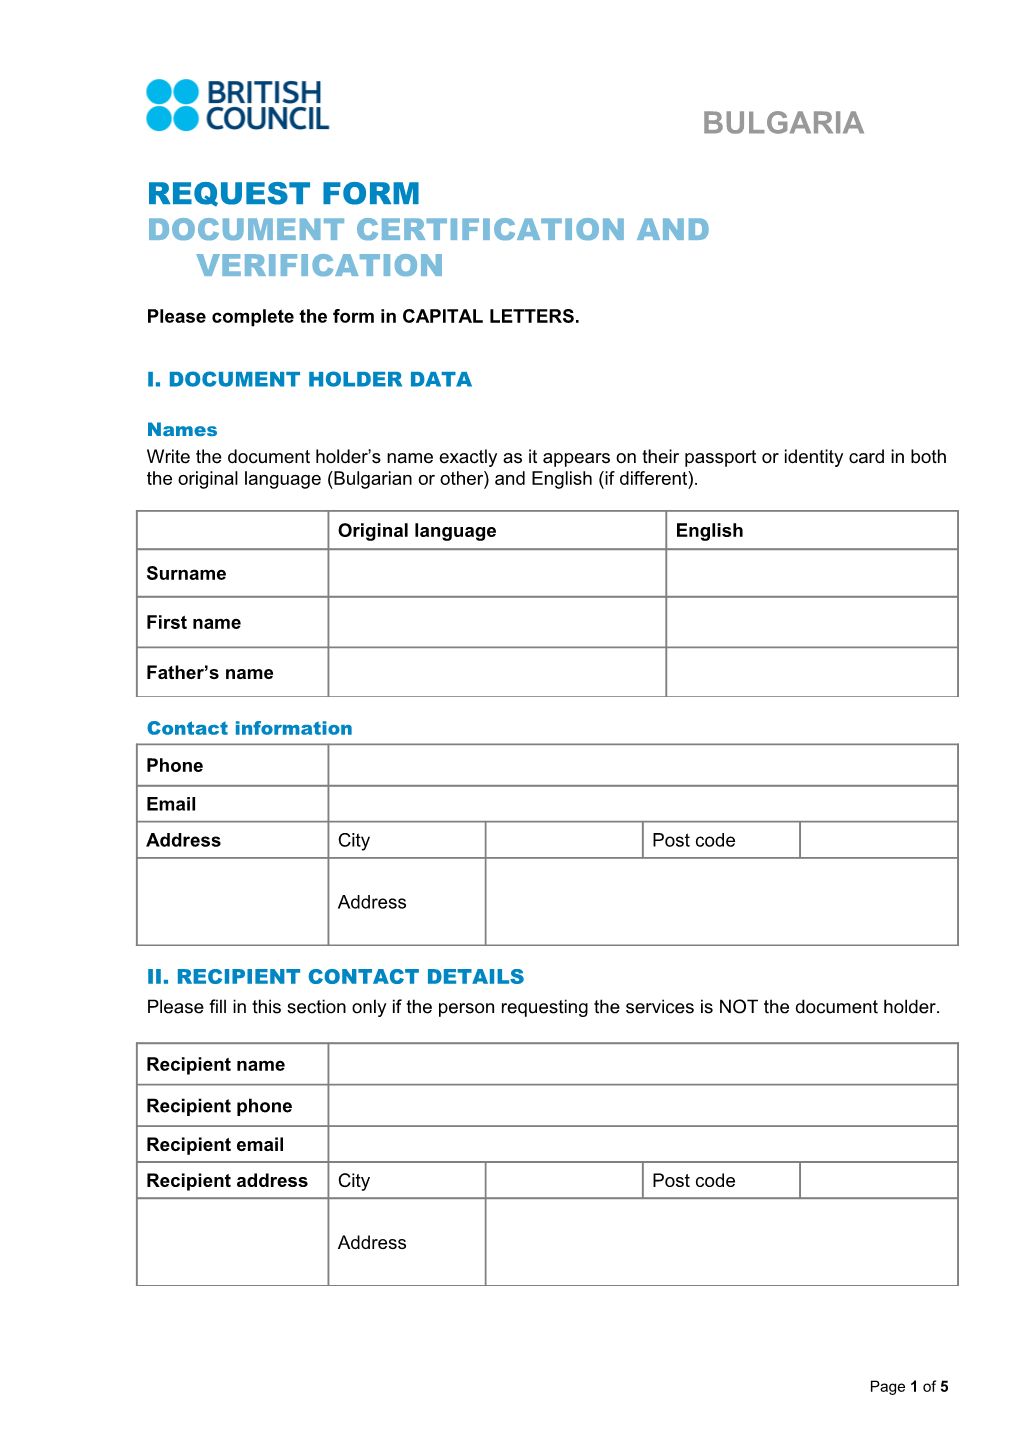 Document Certification and Verification